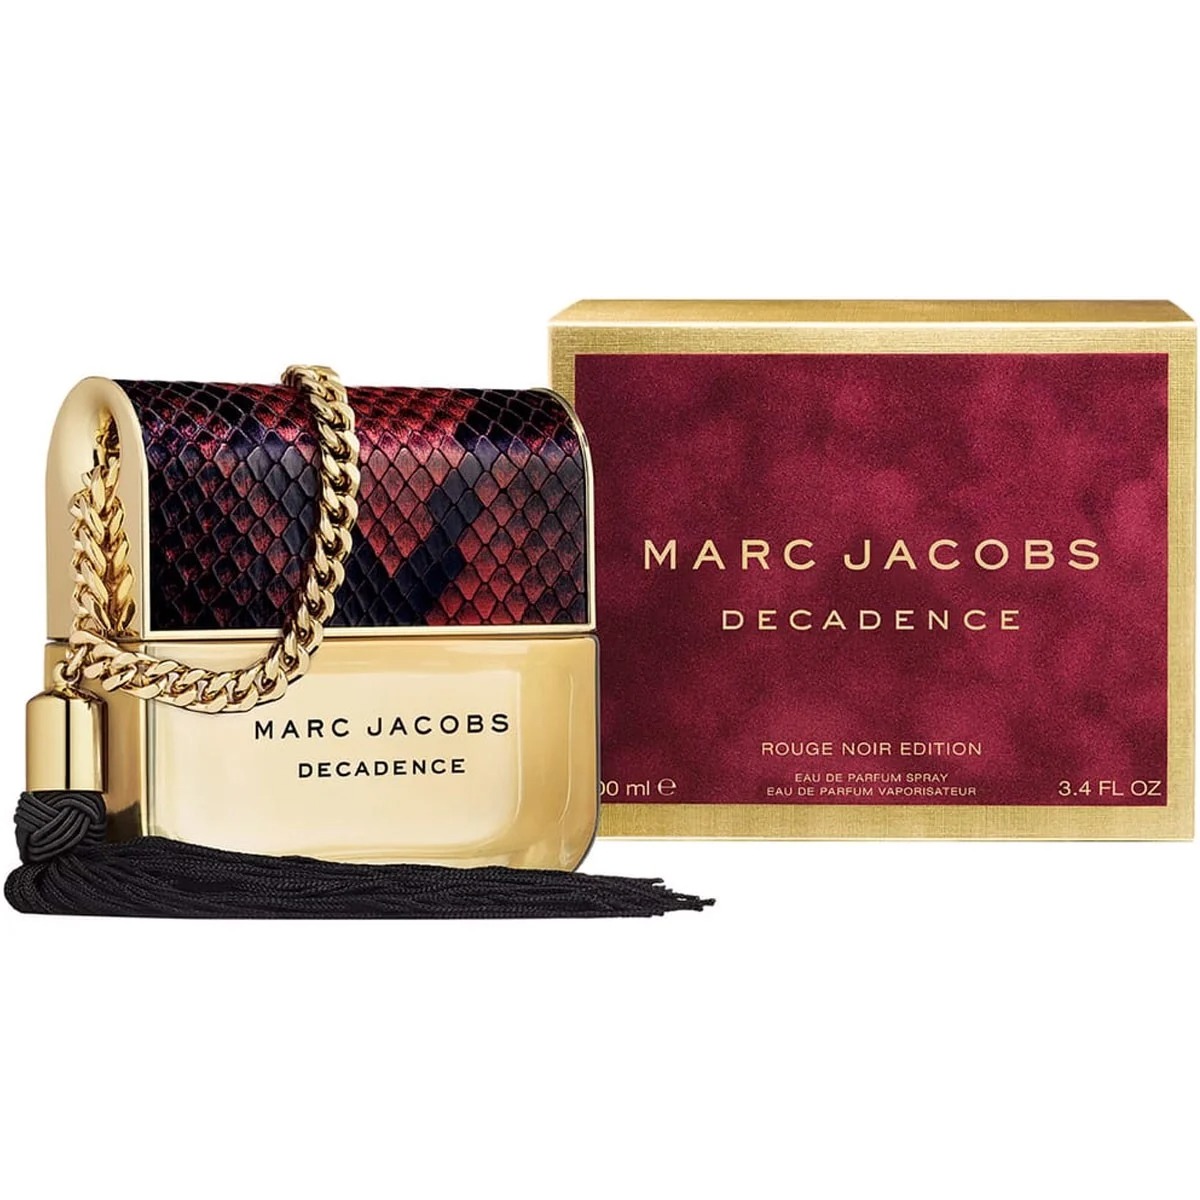 Marc Jacobs Decadence Rouge Noir Edition 1